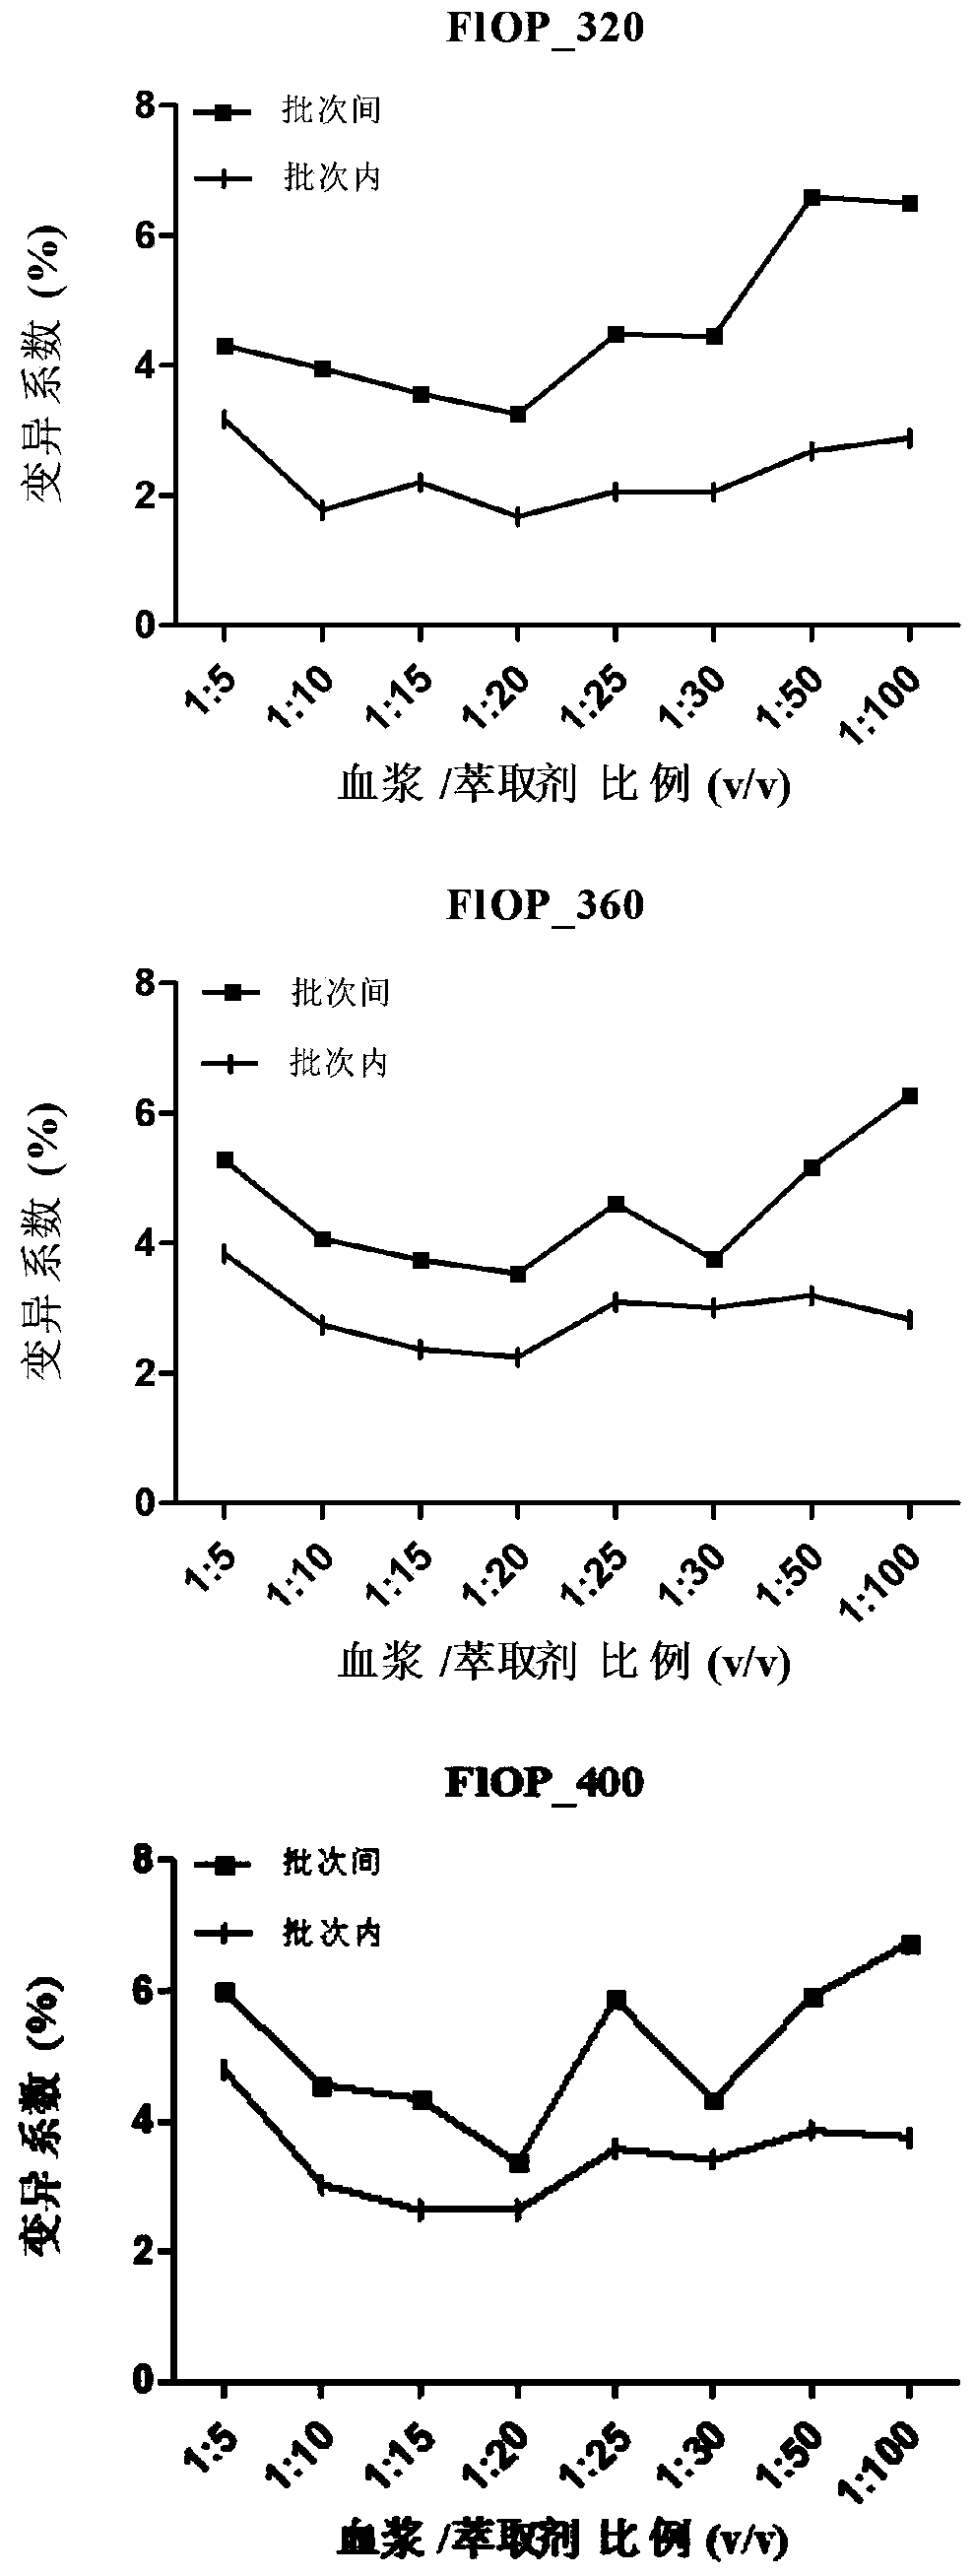 Method for testing oxidative stress biomarkers in blood plasma with low coefficient of variation